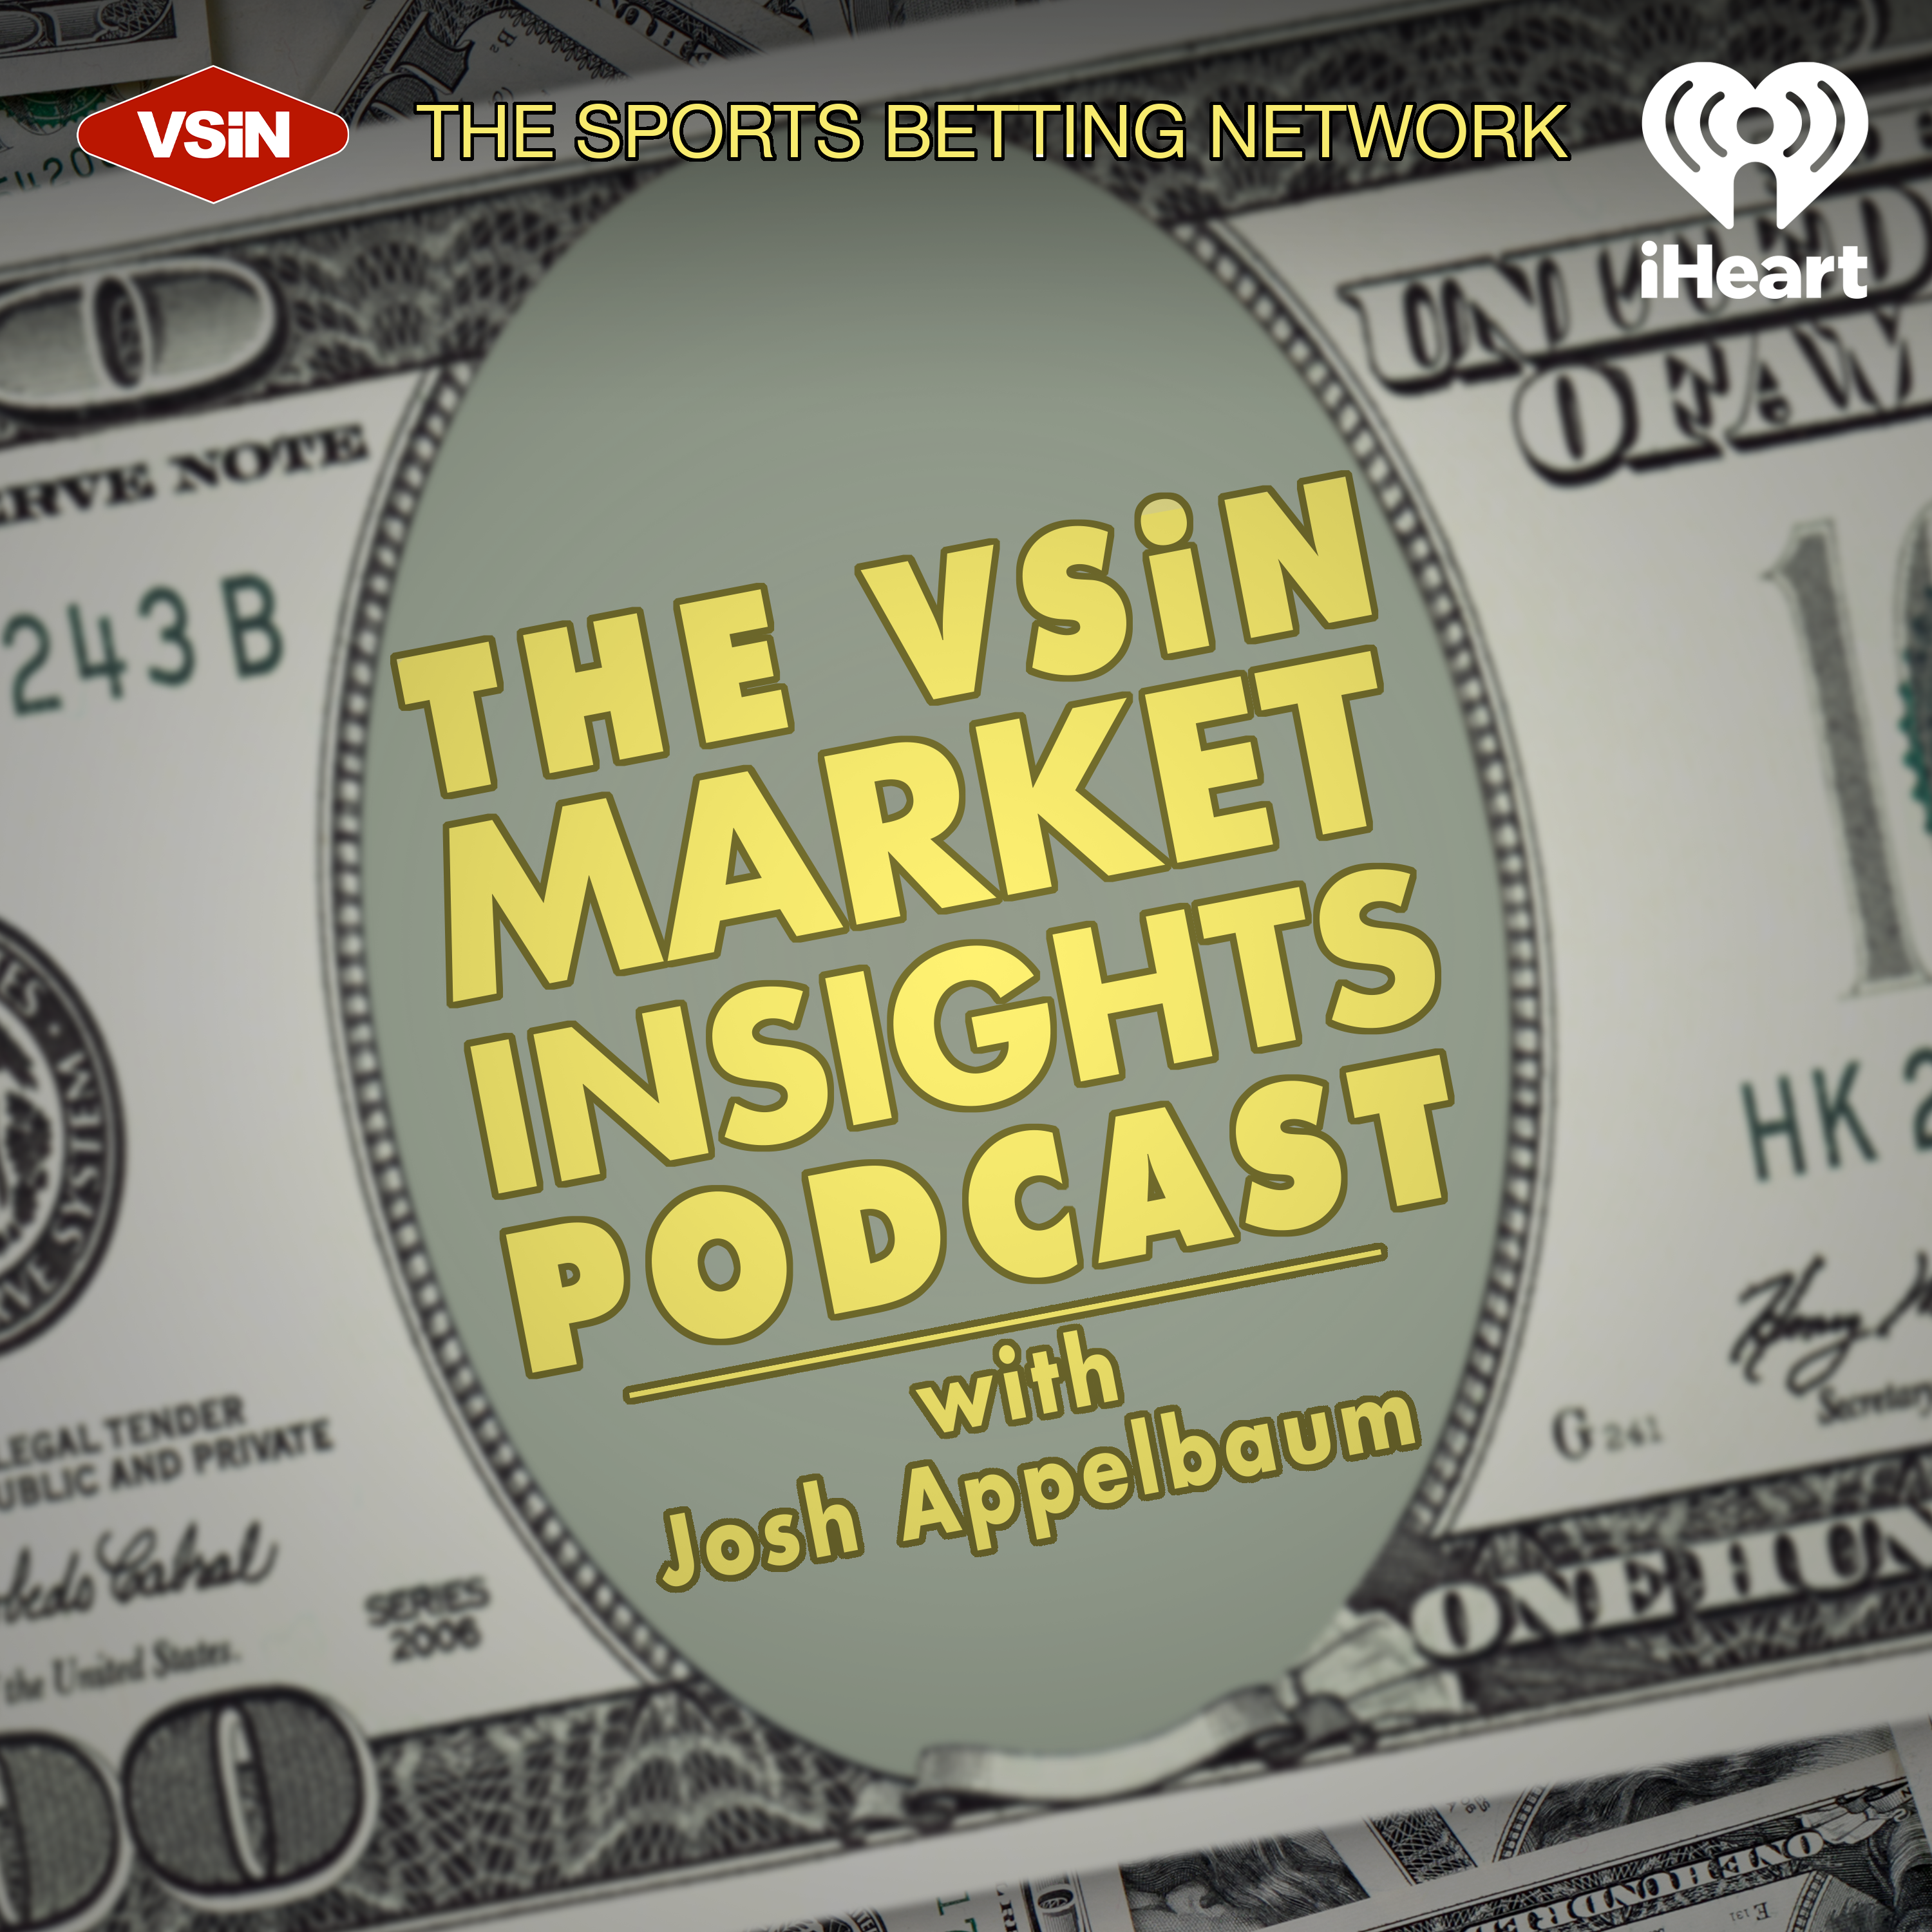 The VSiN Market Insights Podcast with Josh Appelbaum | February 28, 2022